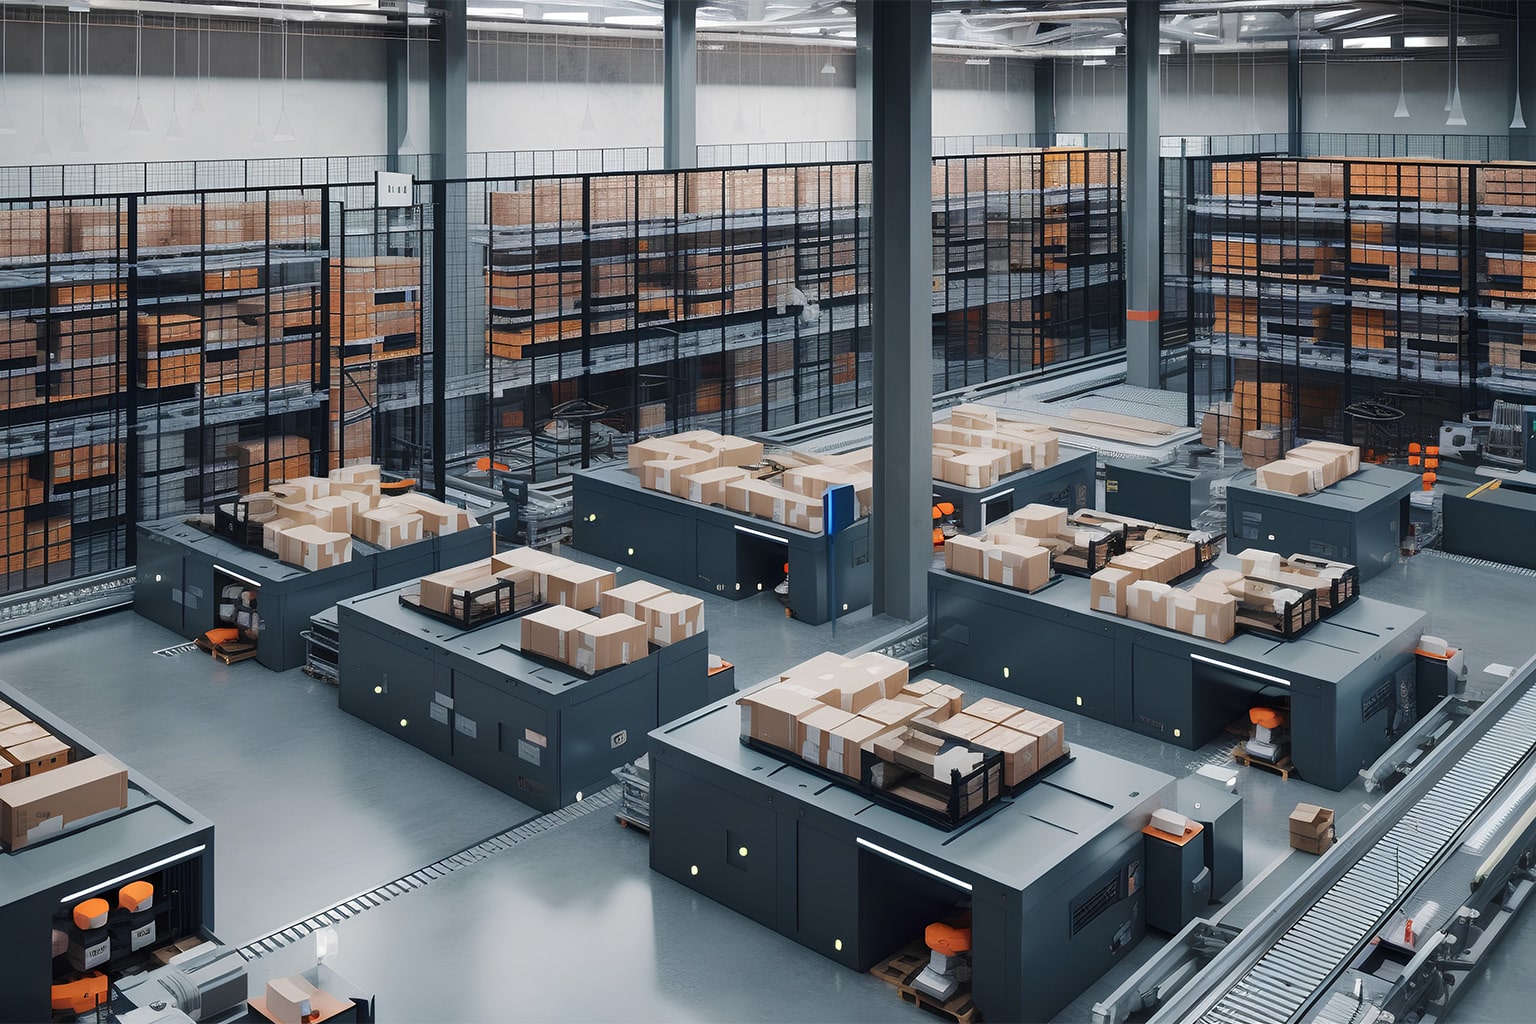 Distribution order management and fulfillment